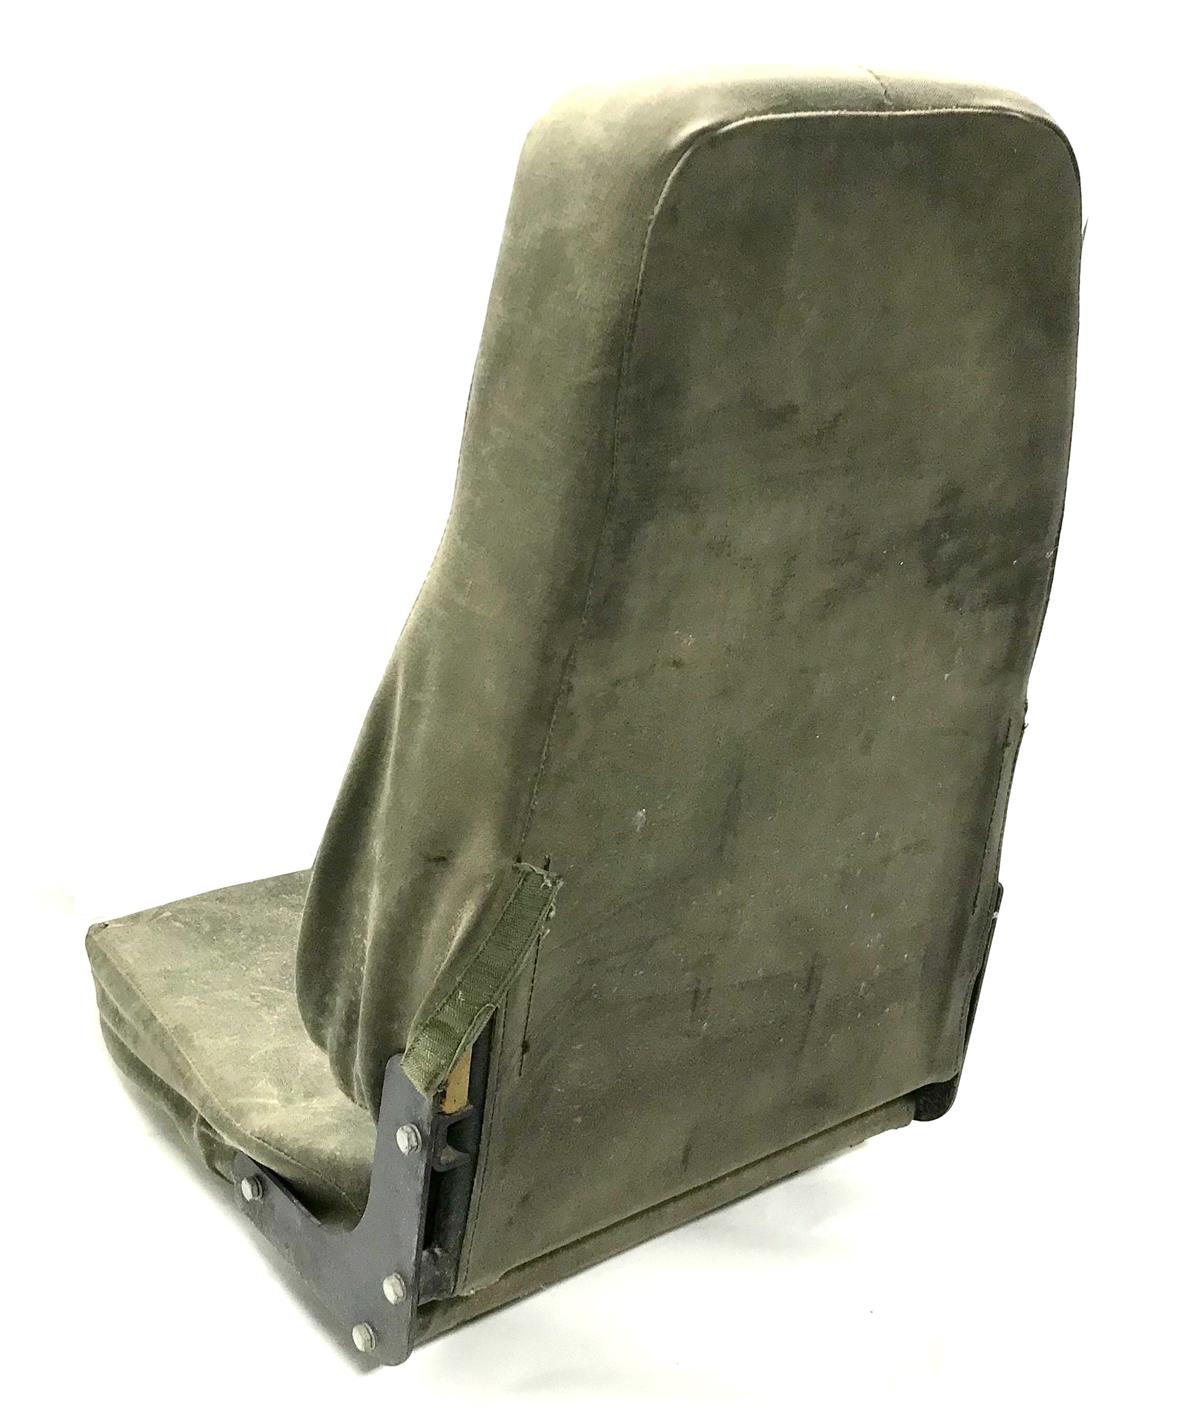 HM-131 | HM-131  HMMWV Seat - Driver Front and Passenger Rear Positions  (7).jpg